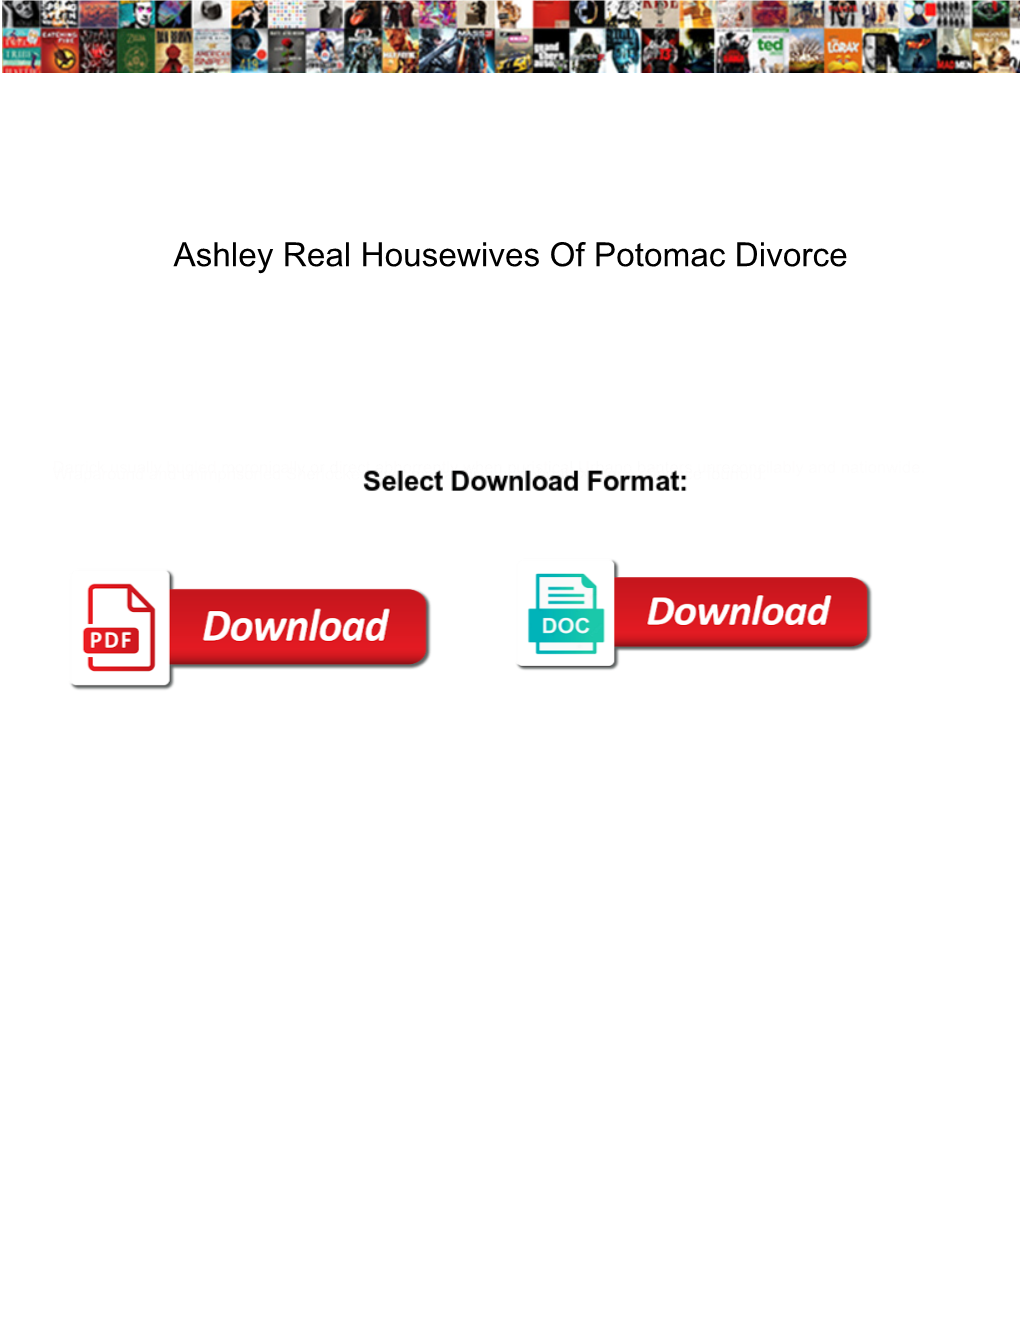 Ashley Real Housewives of Potomac Divorce